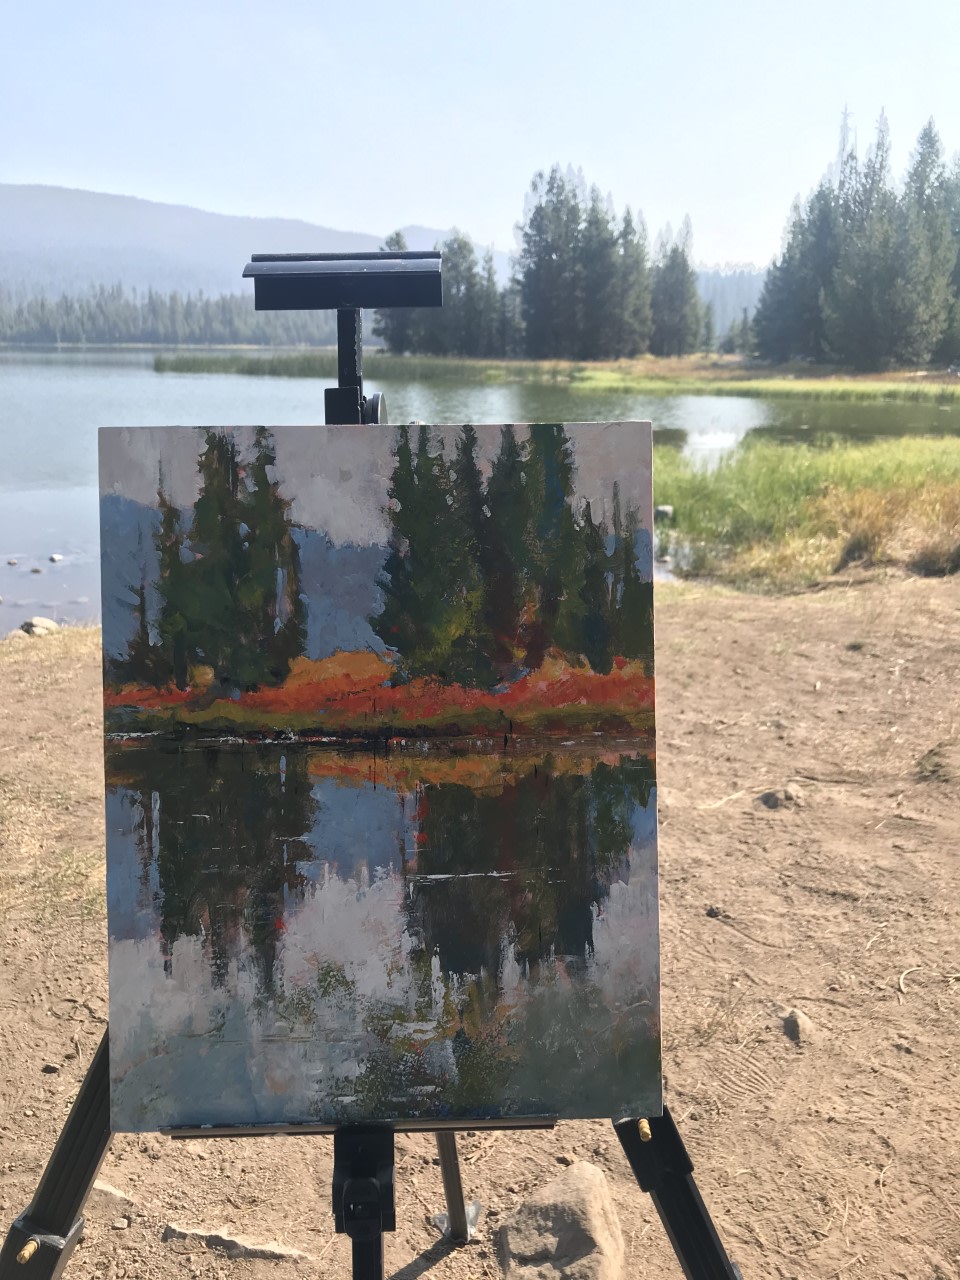 Try Your Hand at Plein-Air Painting With These Tips From a Pro - 5280